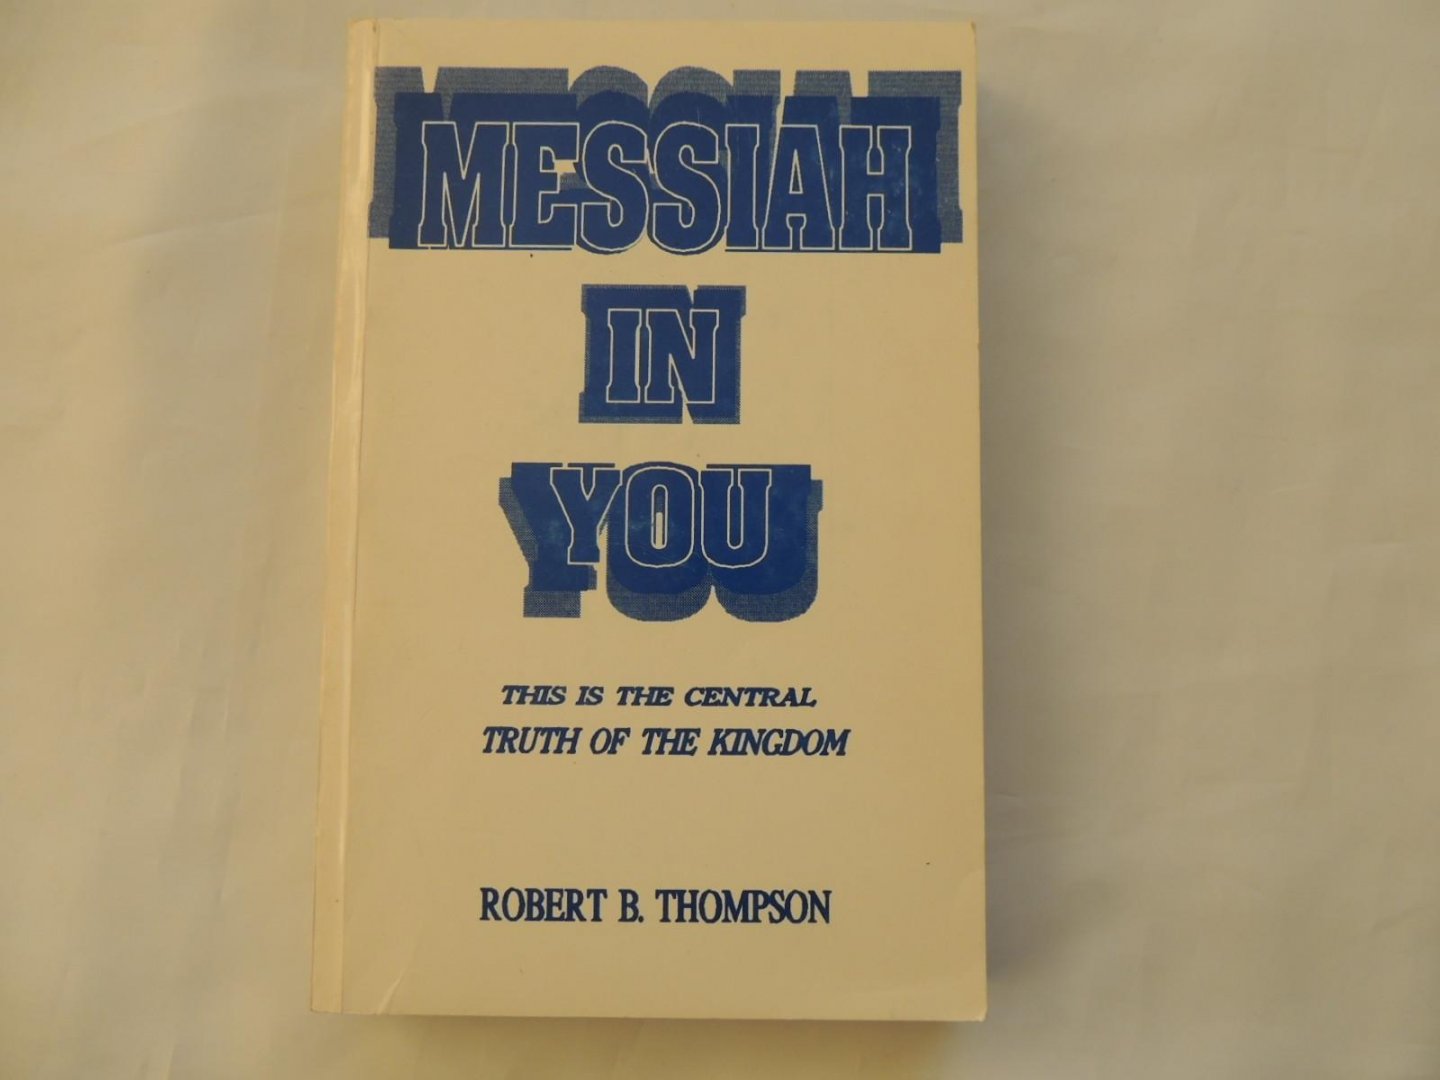 Robert B Thompson - Messiah in you - this is the central TRUTH OF THE KINGDOM